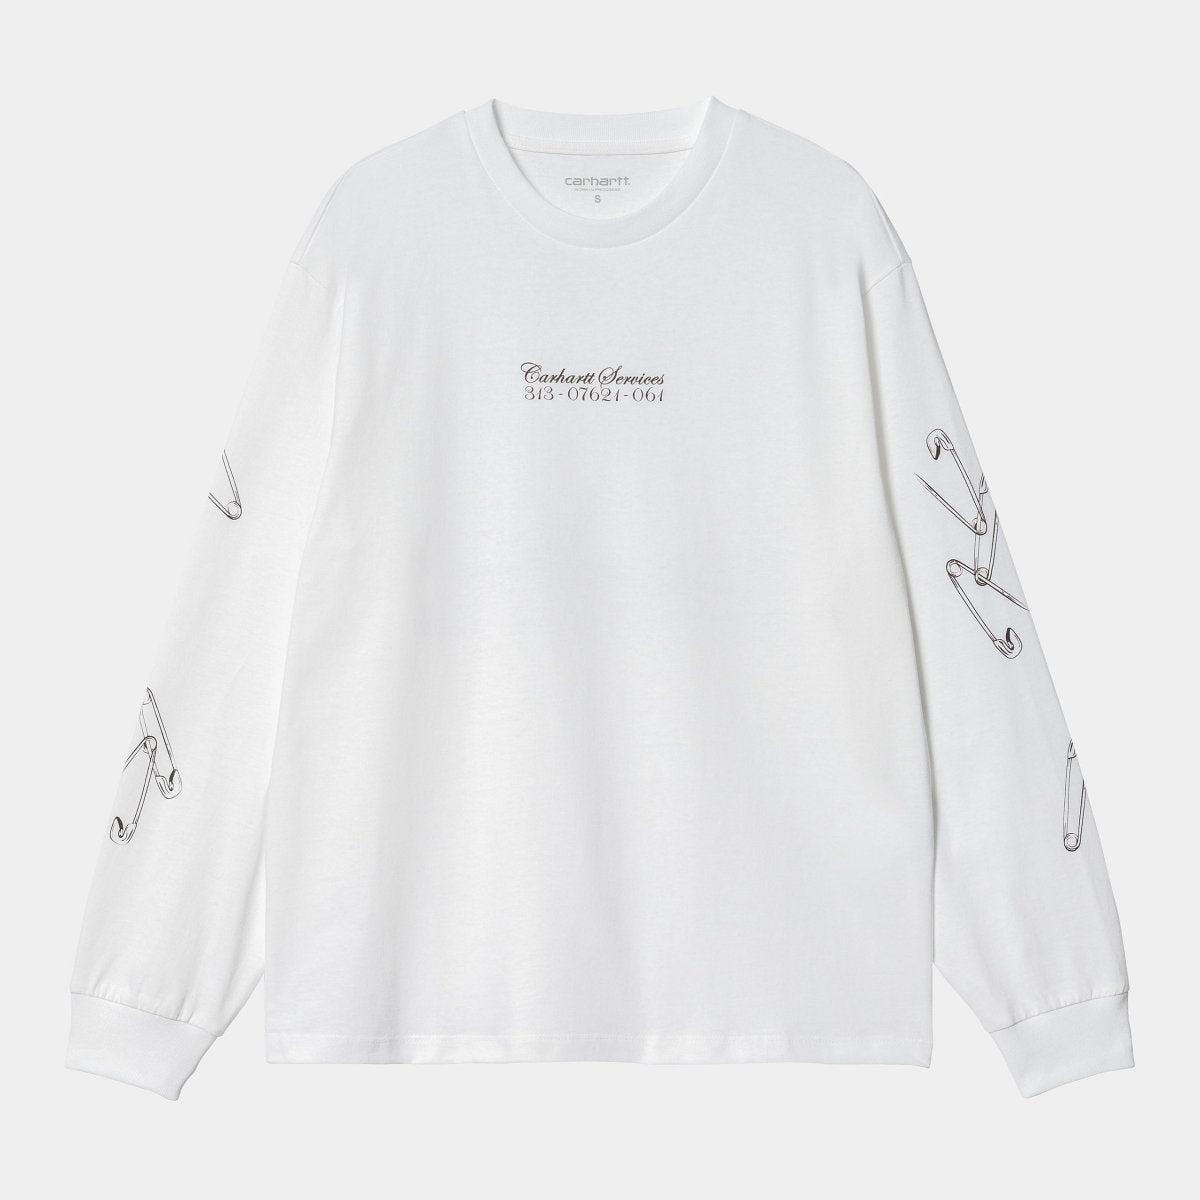 Carhartt WIP L/S Safety Pin T-Shirt White/Bordeaux - KYOTO - Carhartt WIP